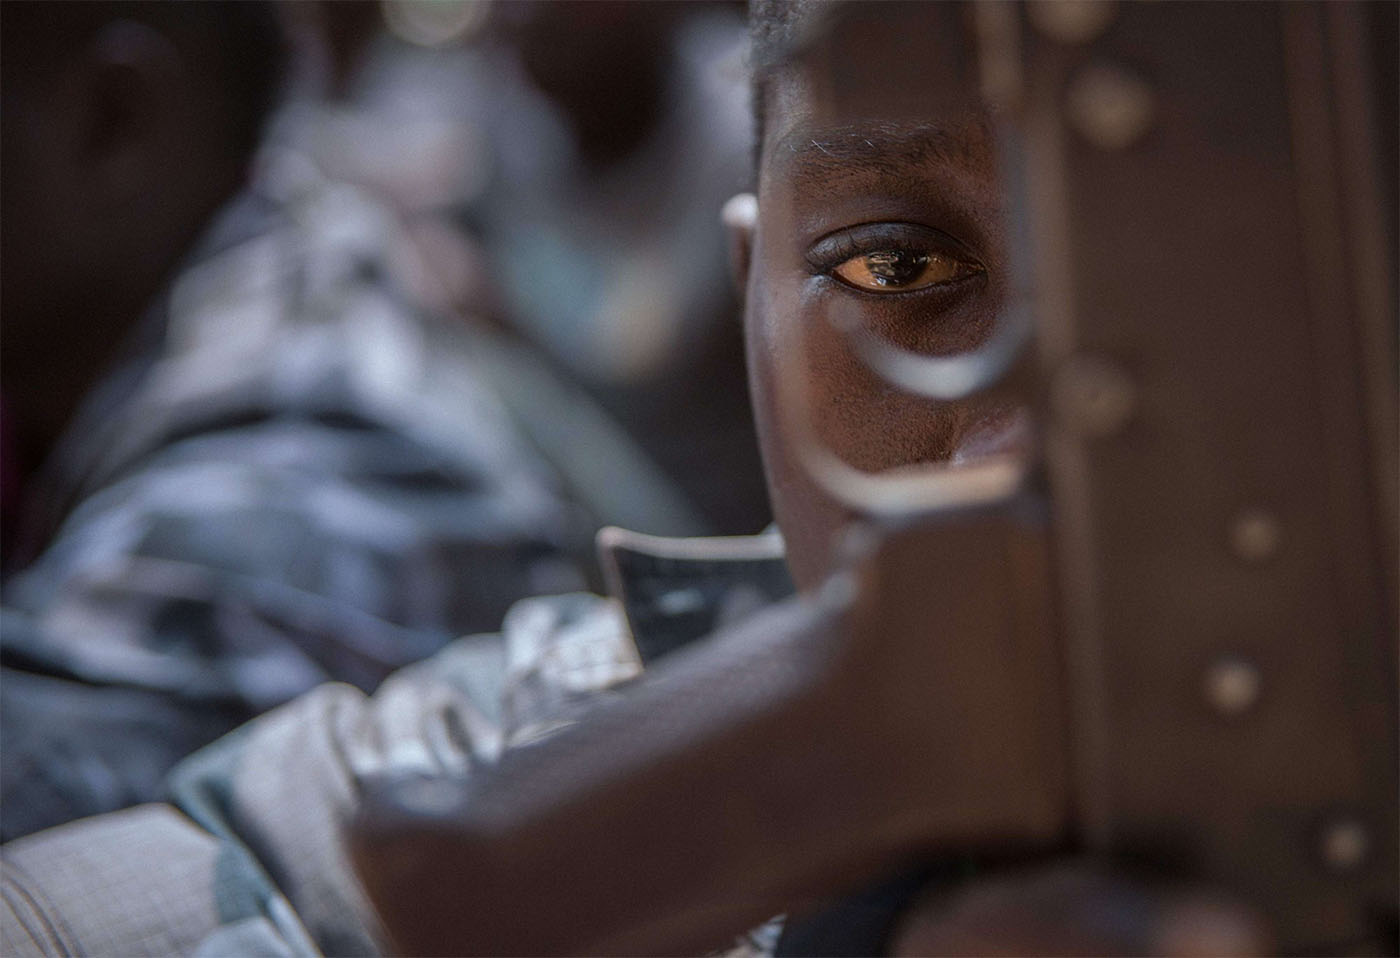 A released child soldier last February looks through a rifle trigger guard during a release ceremony for child soldiers in Yambio, South Sudan